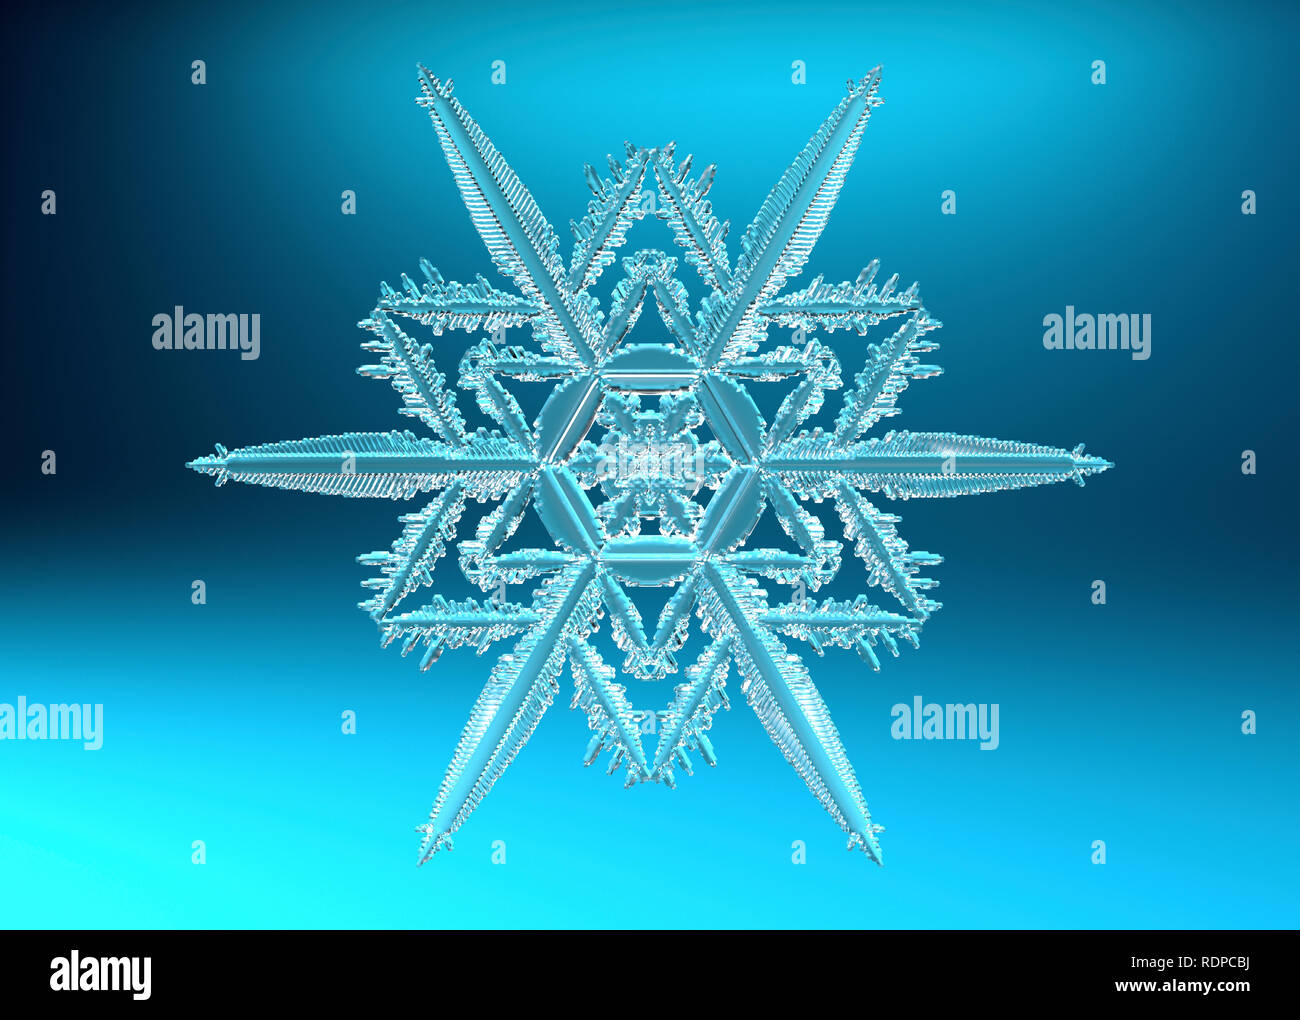 Snowflake against a blue background, illustration. Stock Photo